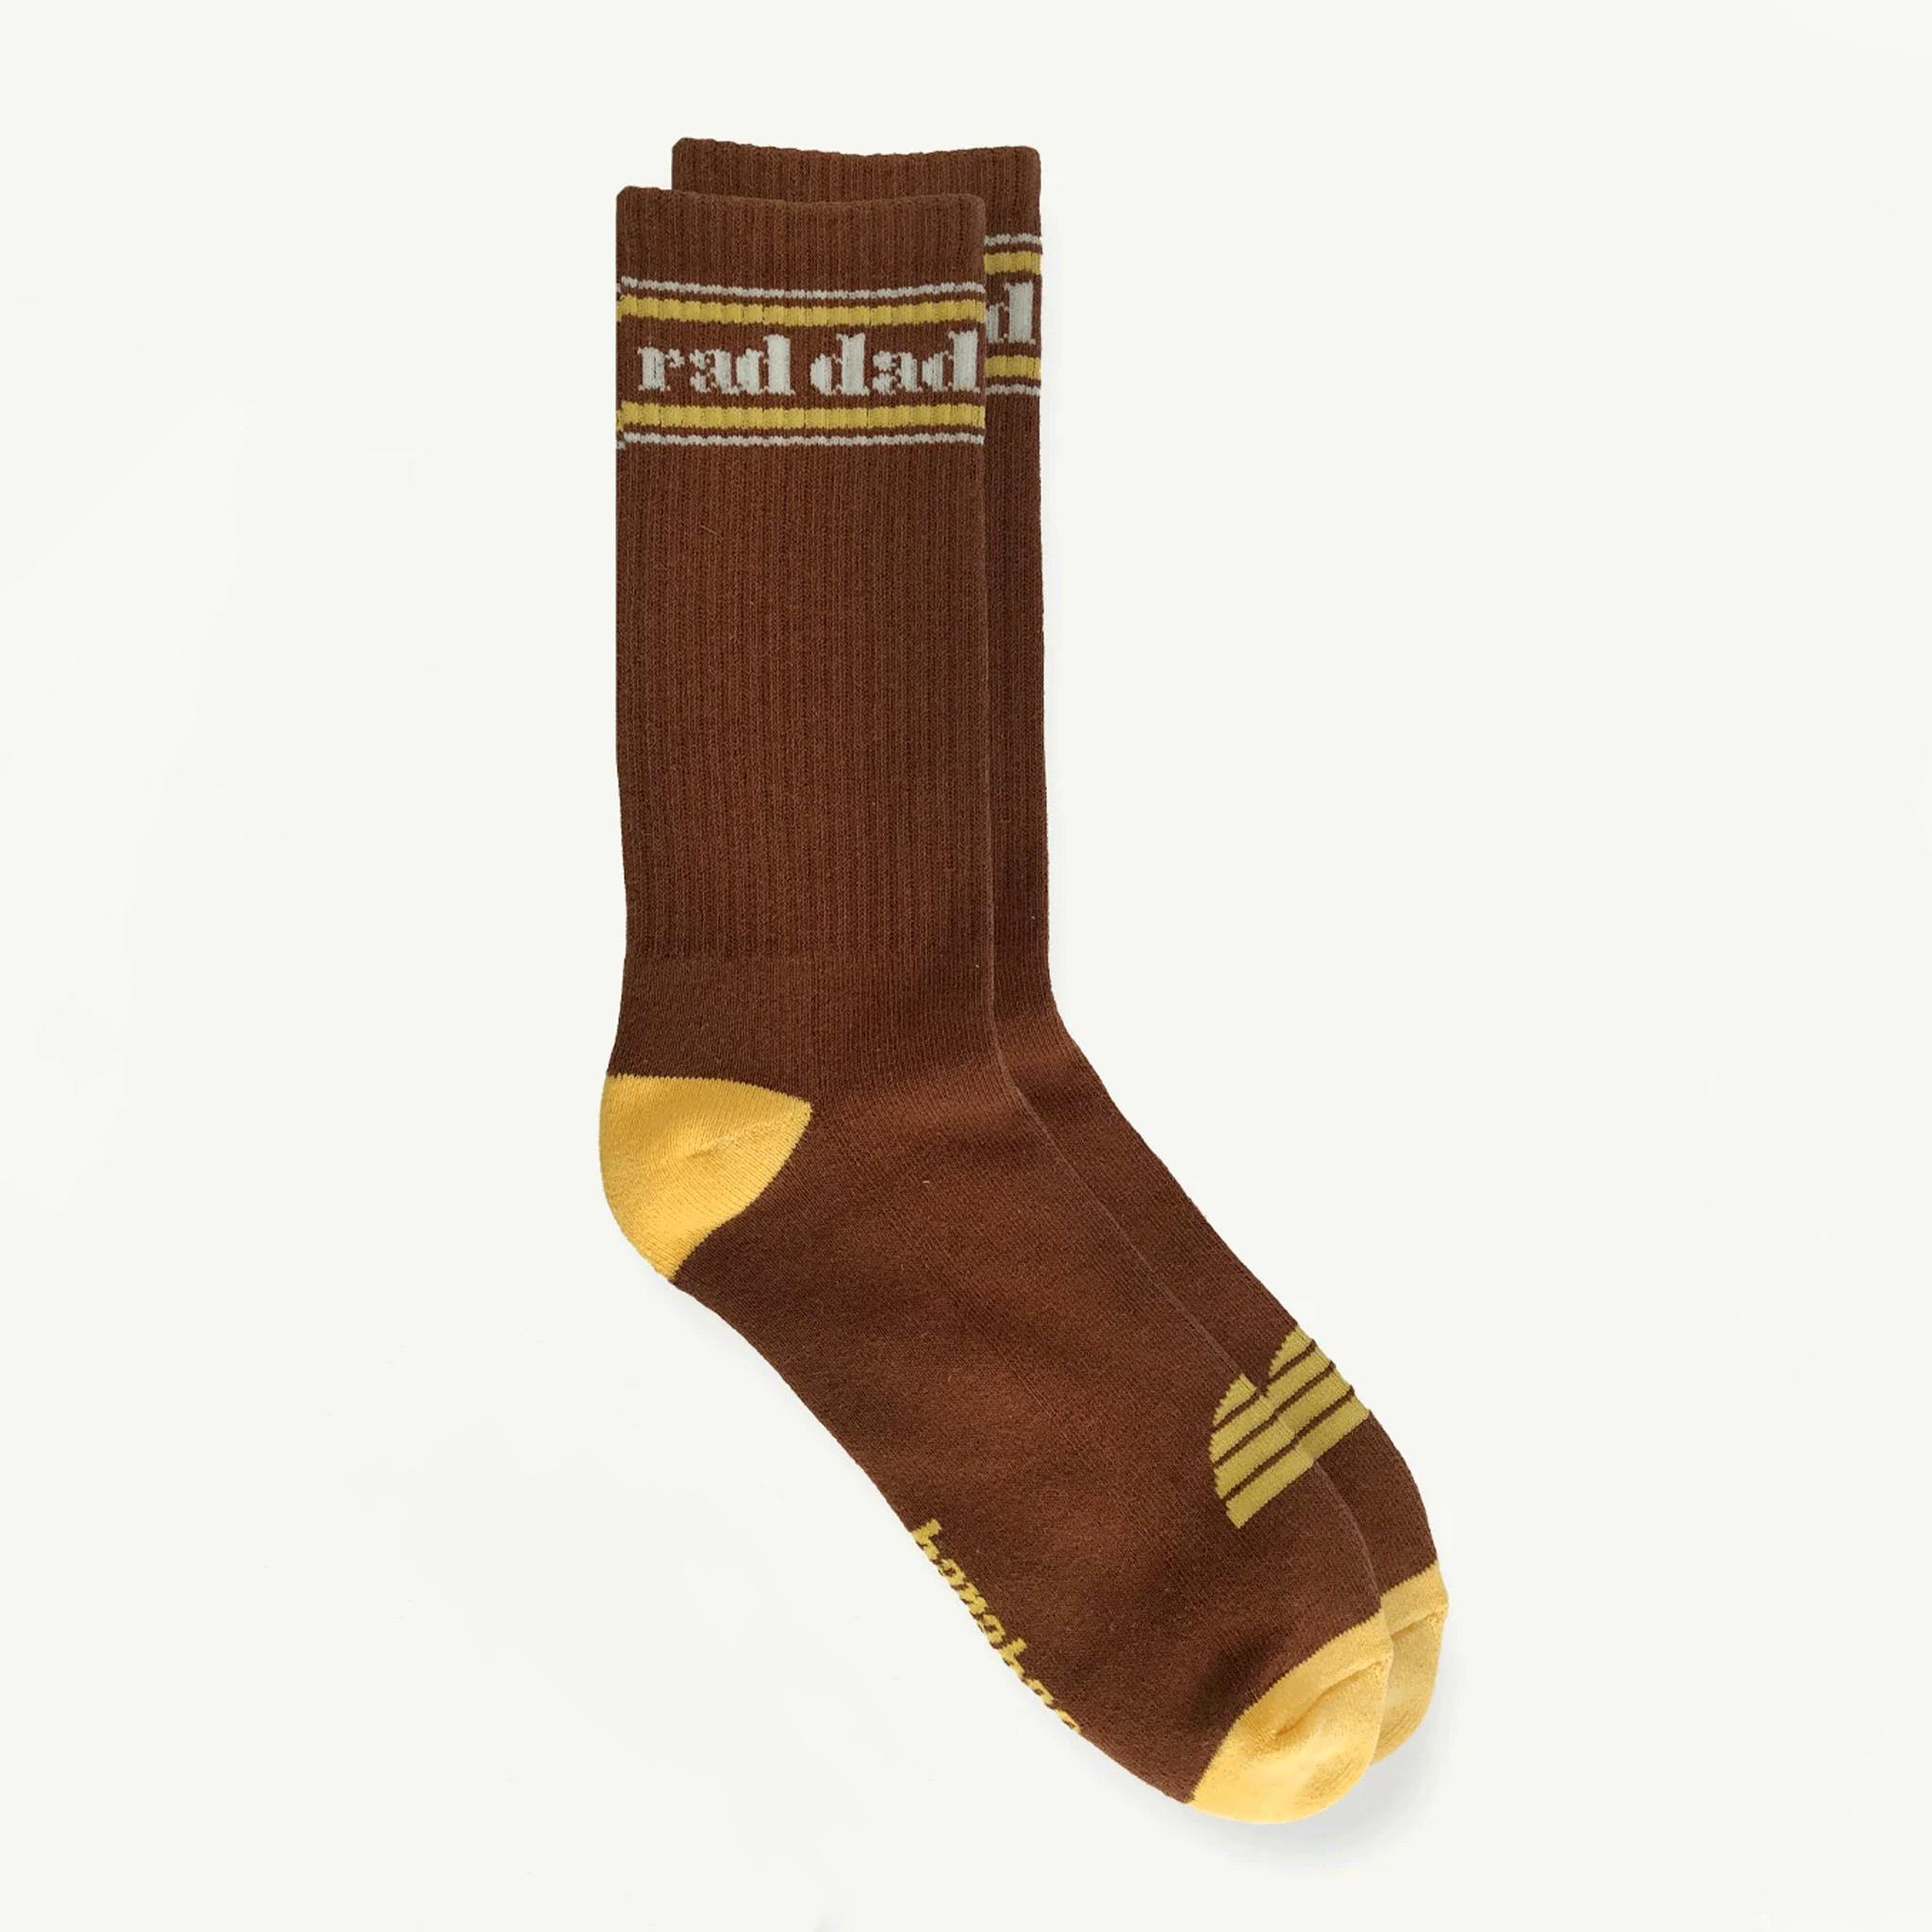 A pair of brown and yellow socks with white text at the top that reads, "rad dad".